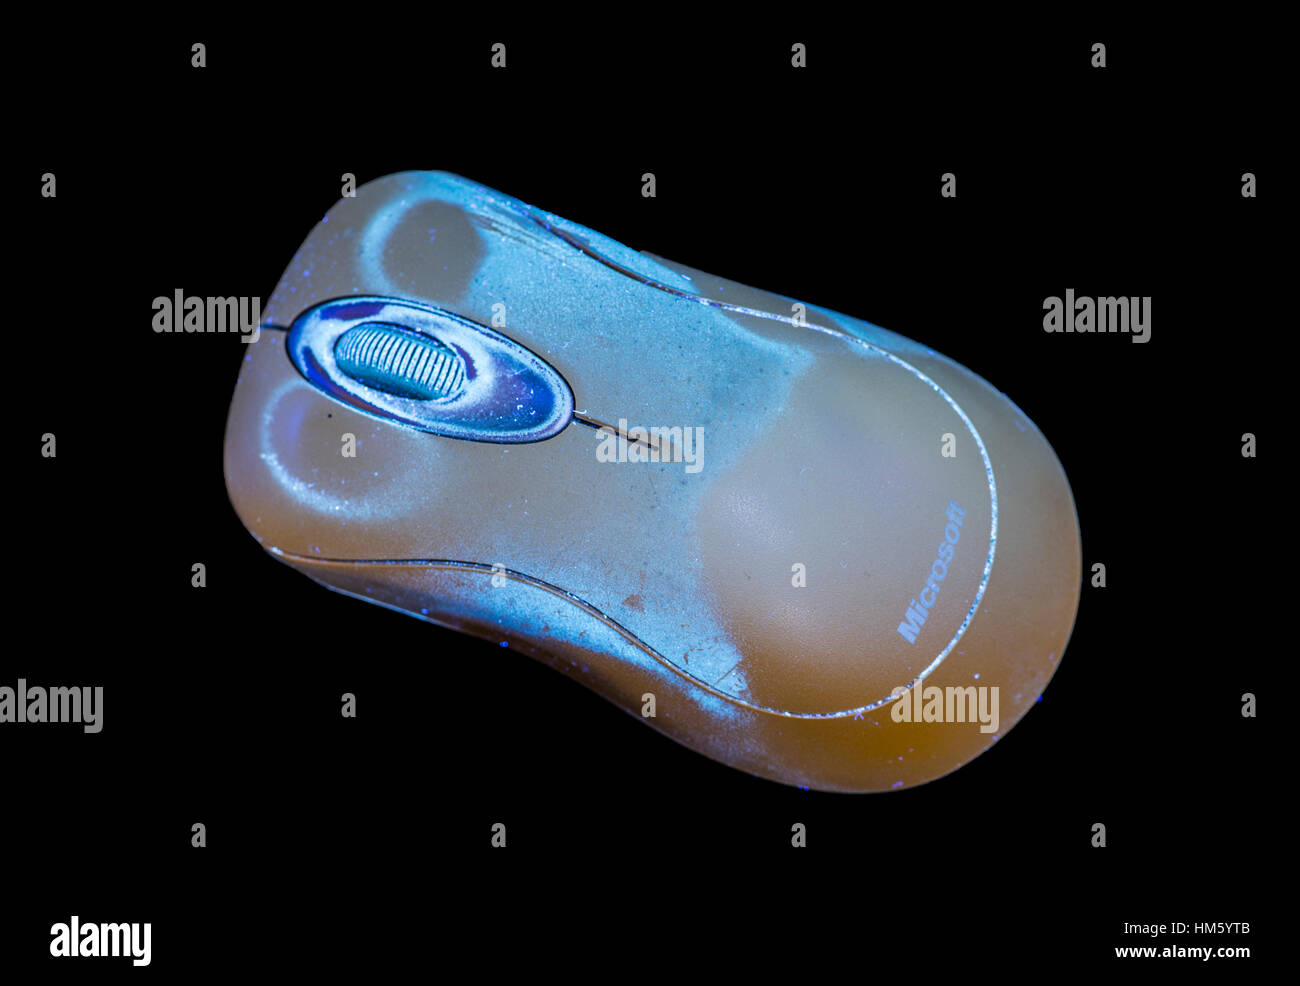 Computer mouse, fluorescing in UV light, showing dirt on surface Stock Photo